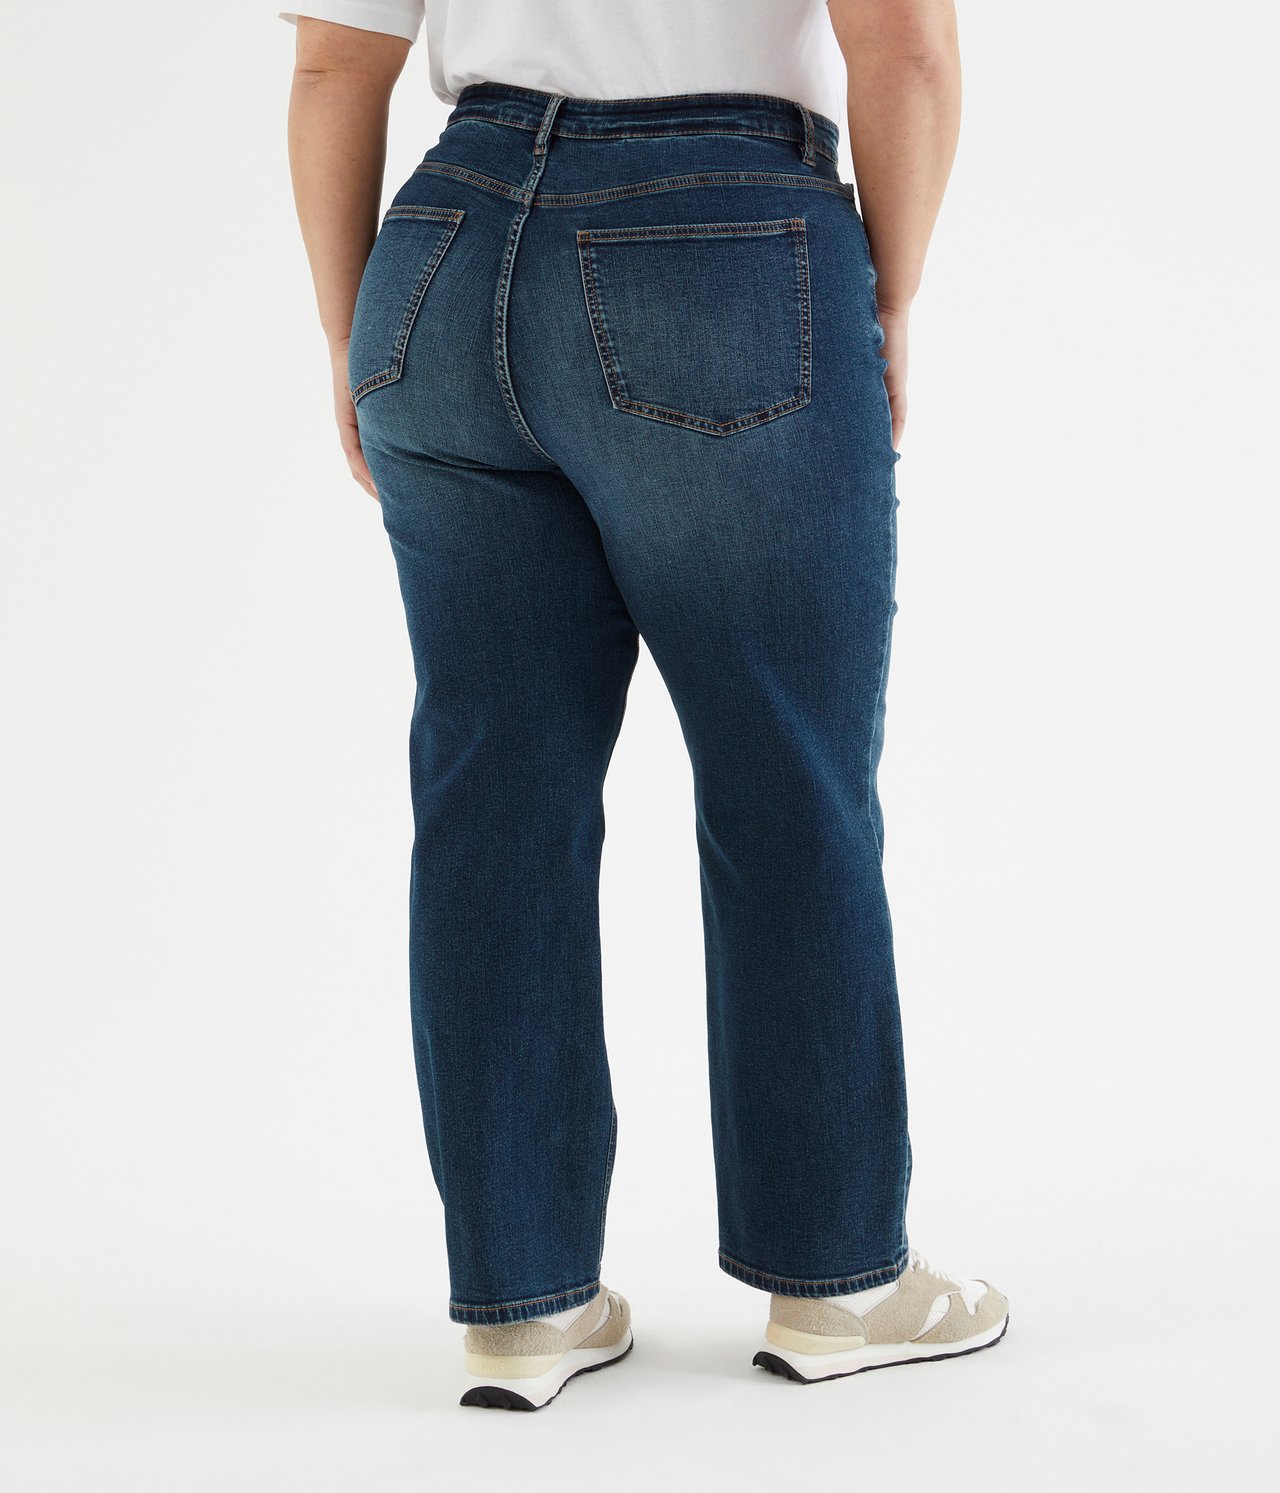 Penny jeans straight fit - Denim - 4